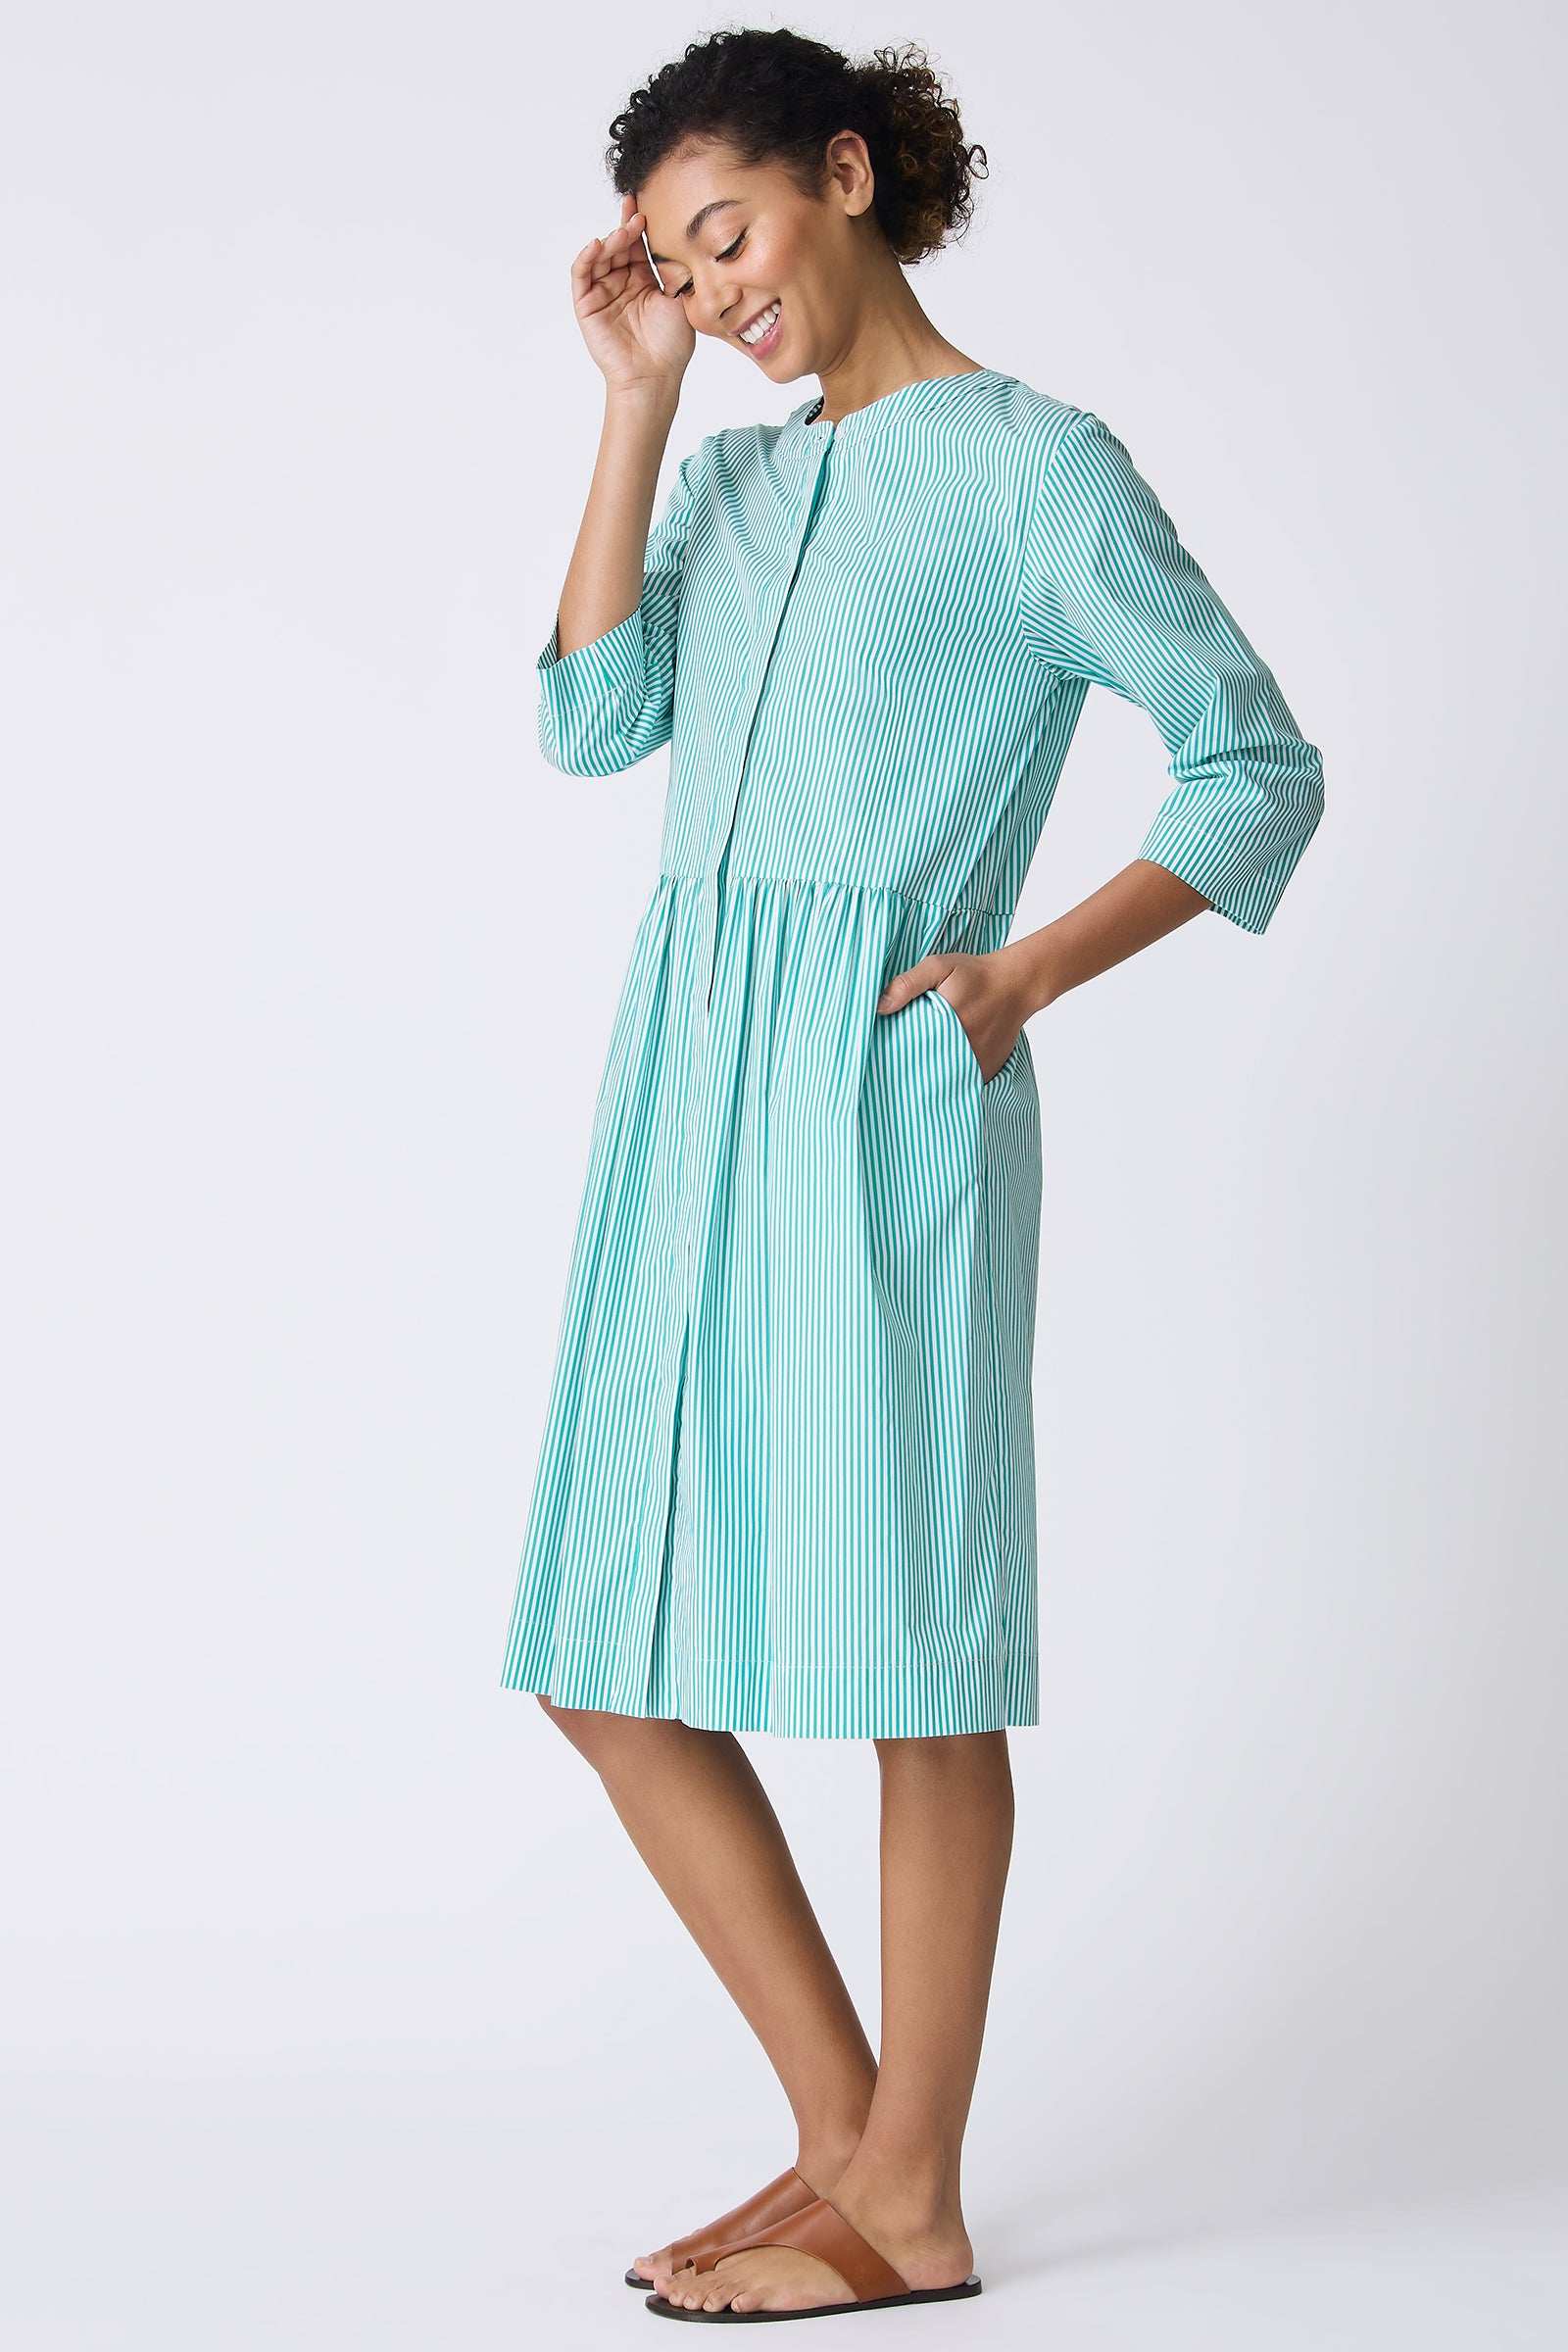 Kal Rieman Abby Shirt Dress in Miami Stripe Green on model smiling and looking down full side view